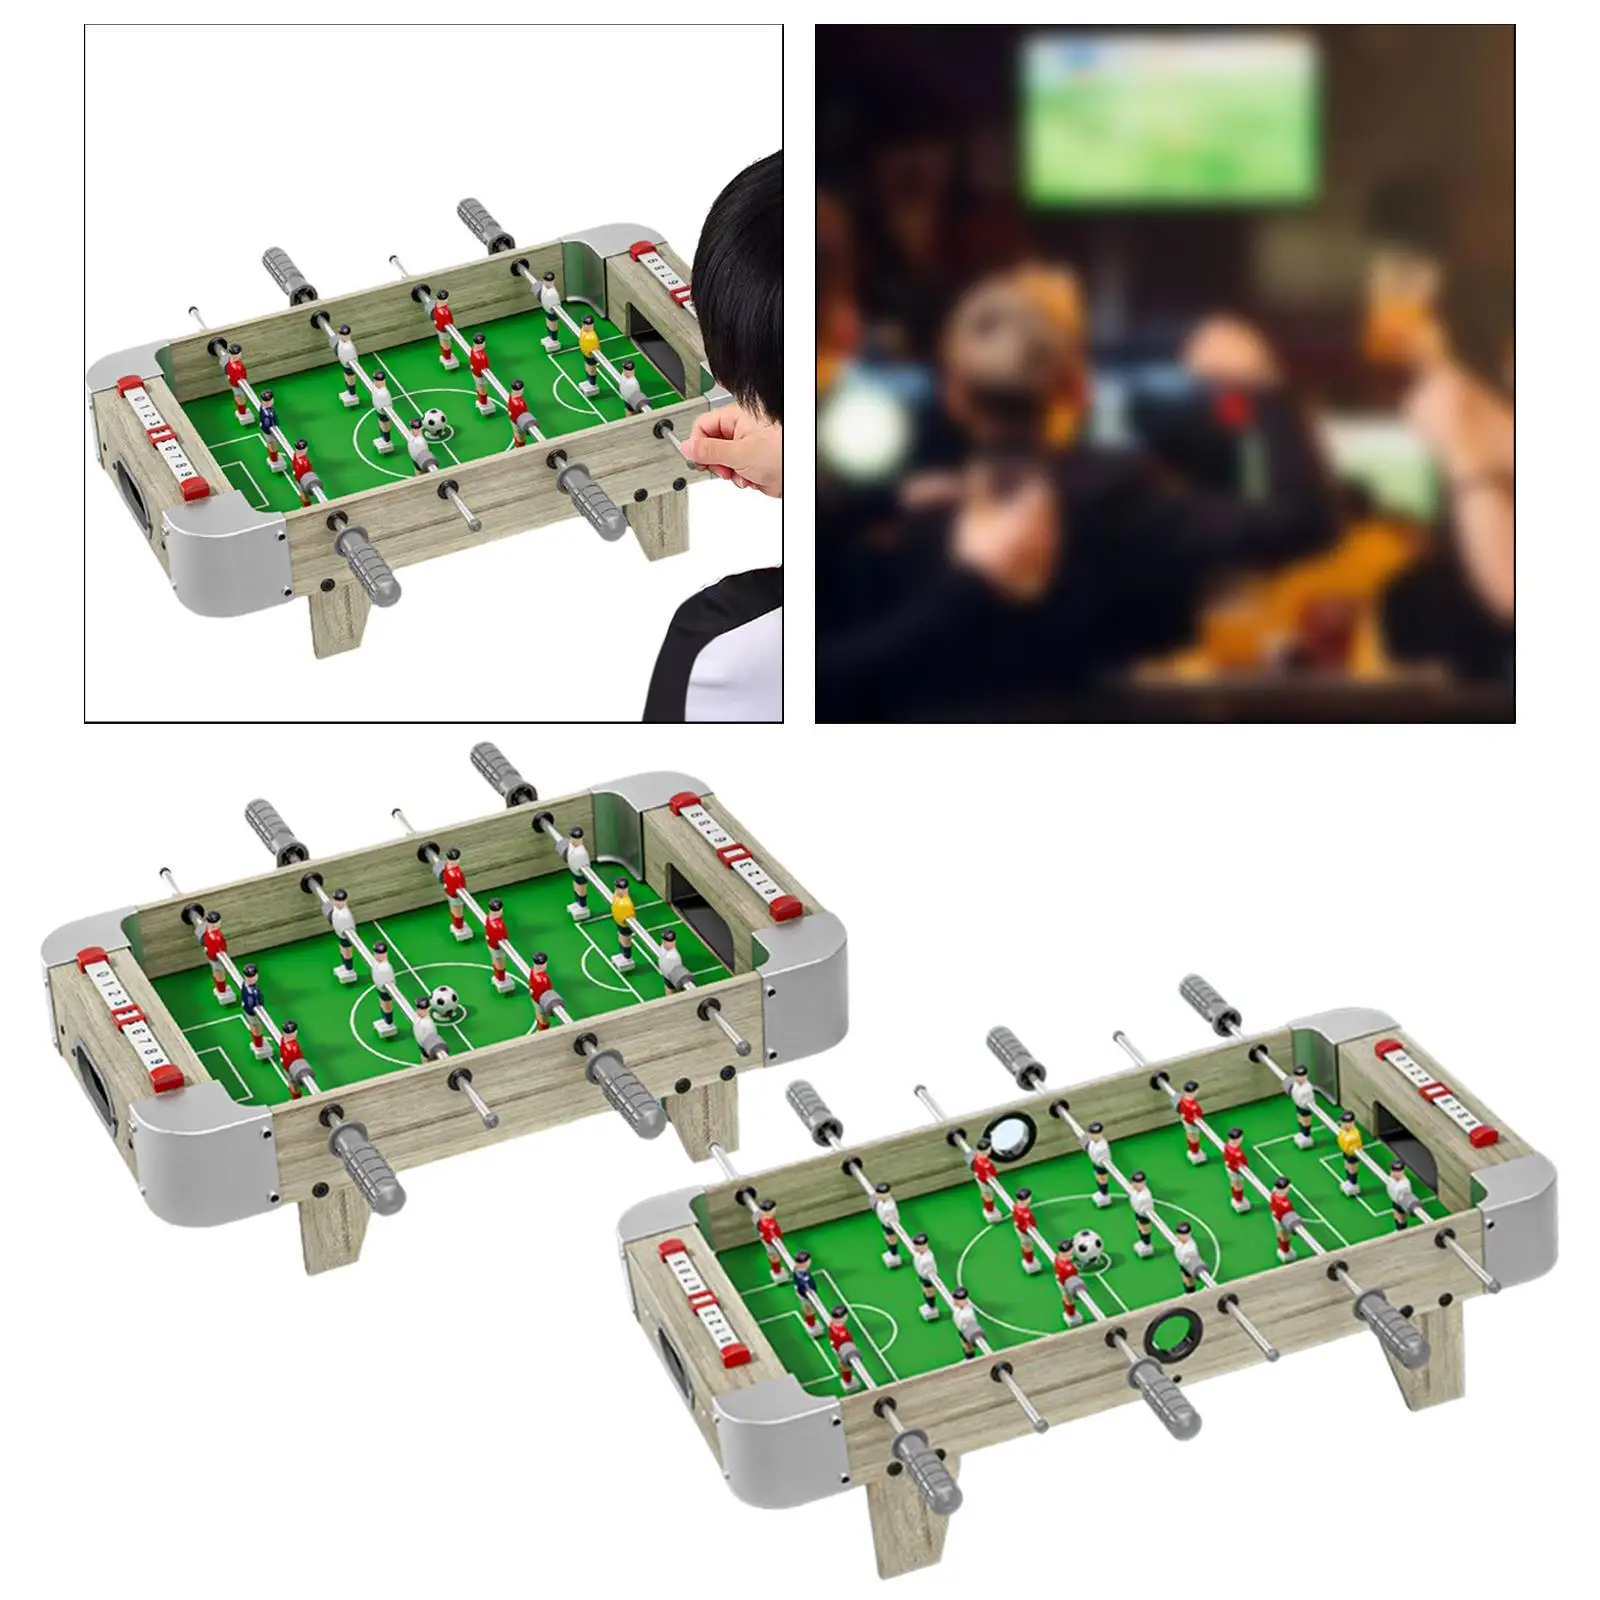 Desktop Football Table Tabletop Football Soccer Pinball Games Two Hands Developmental Toy Interactive Toy Wooden DIY for Sports